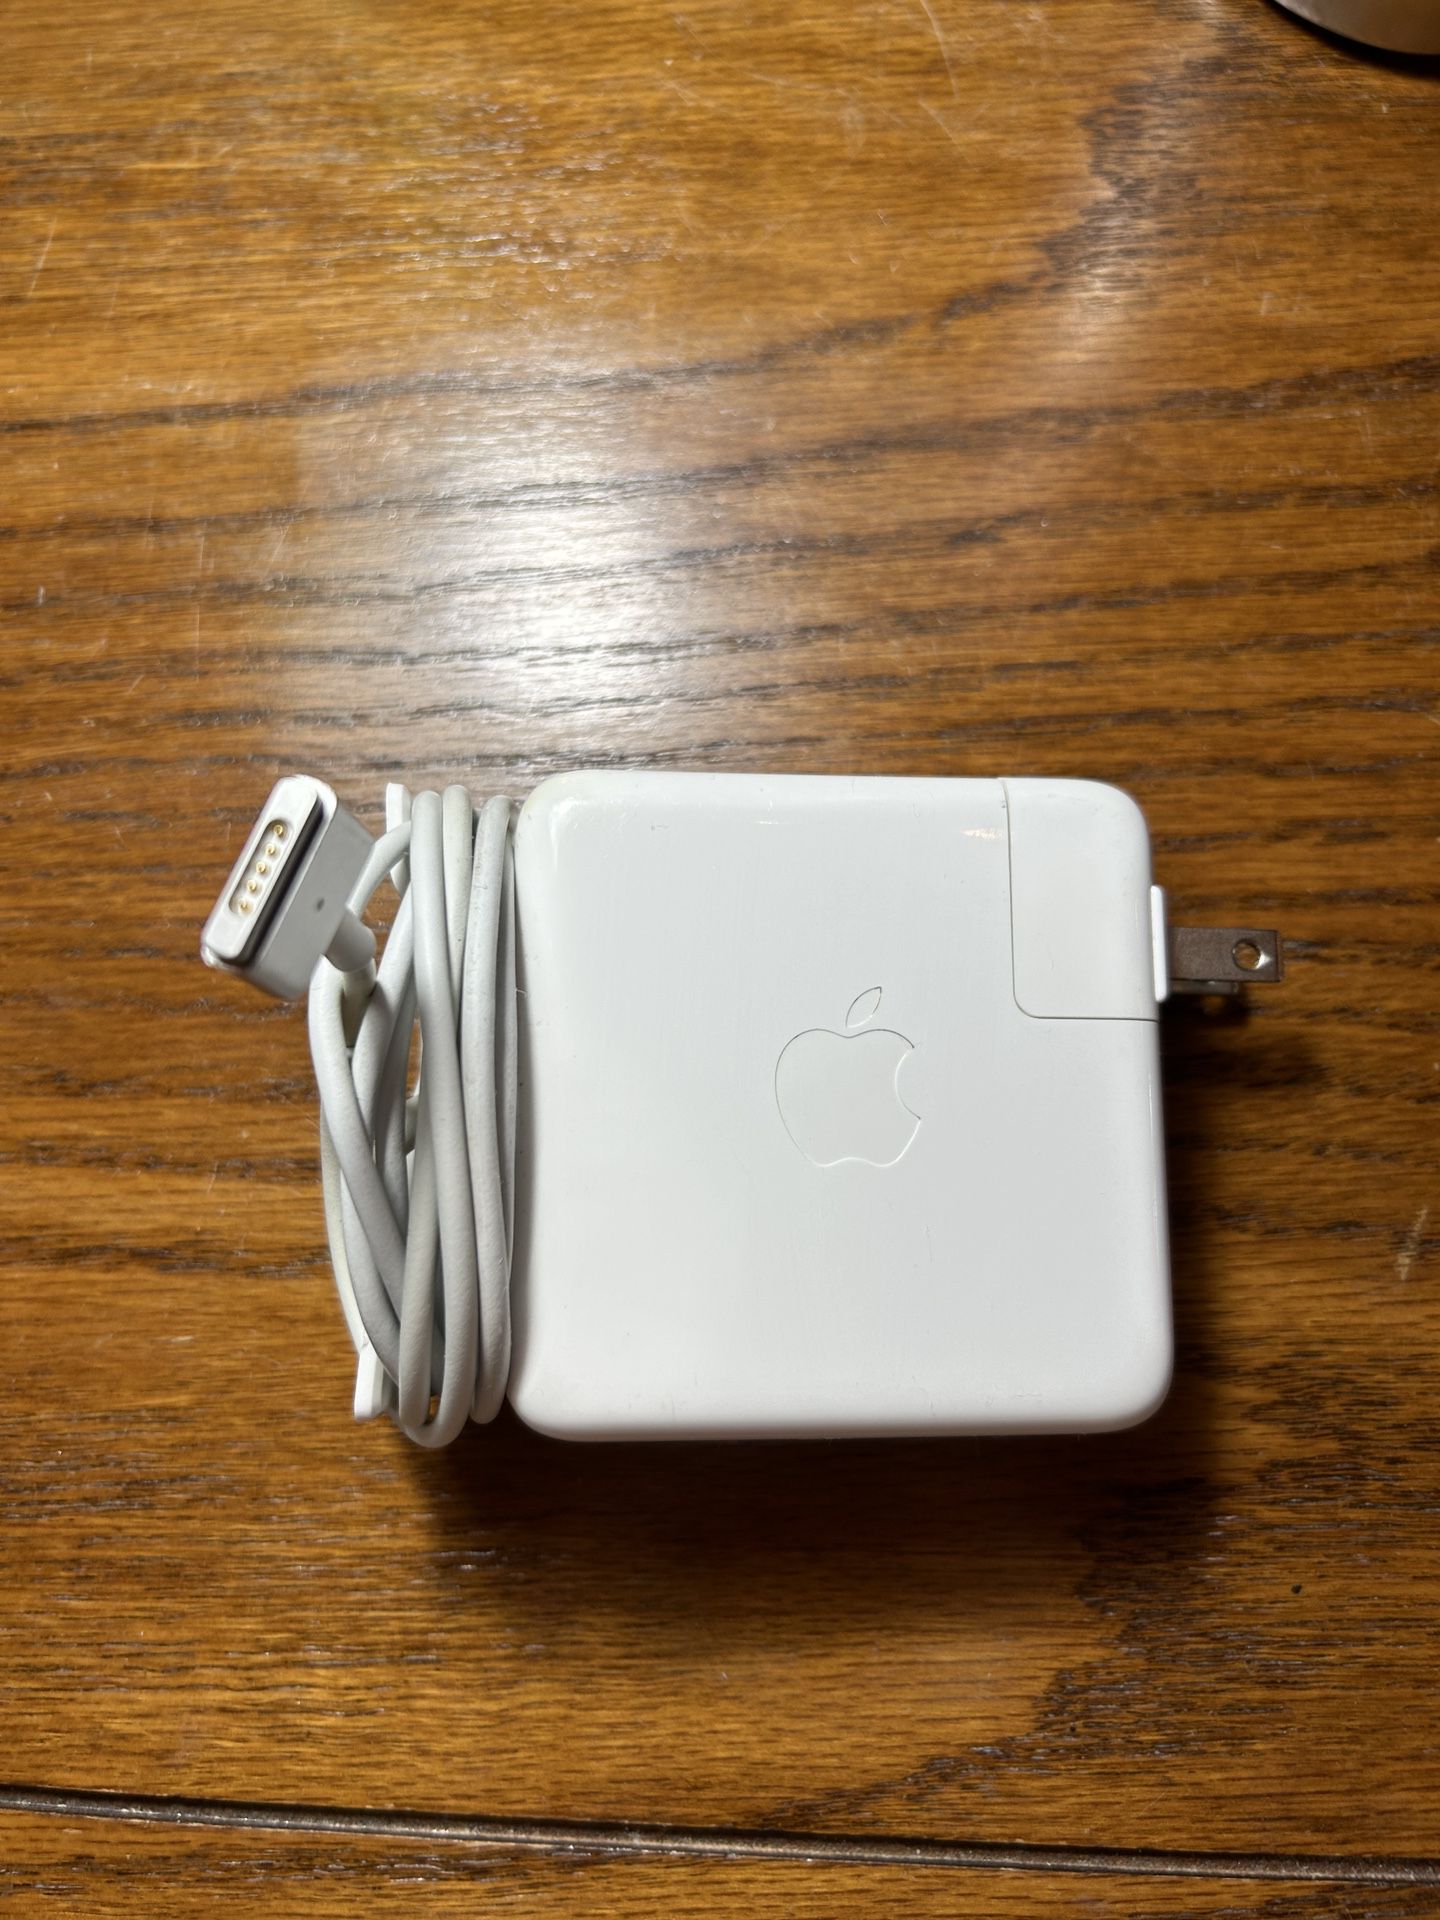 MacBook Charger With Extension Cord, 60 W MagSafe 2 Power Adapter